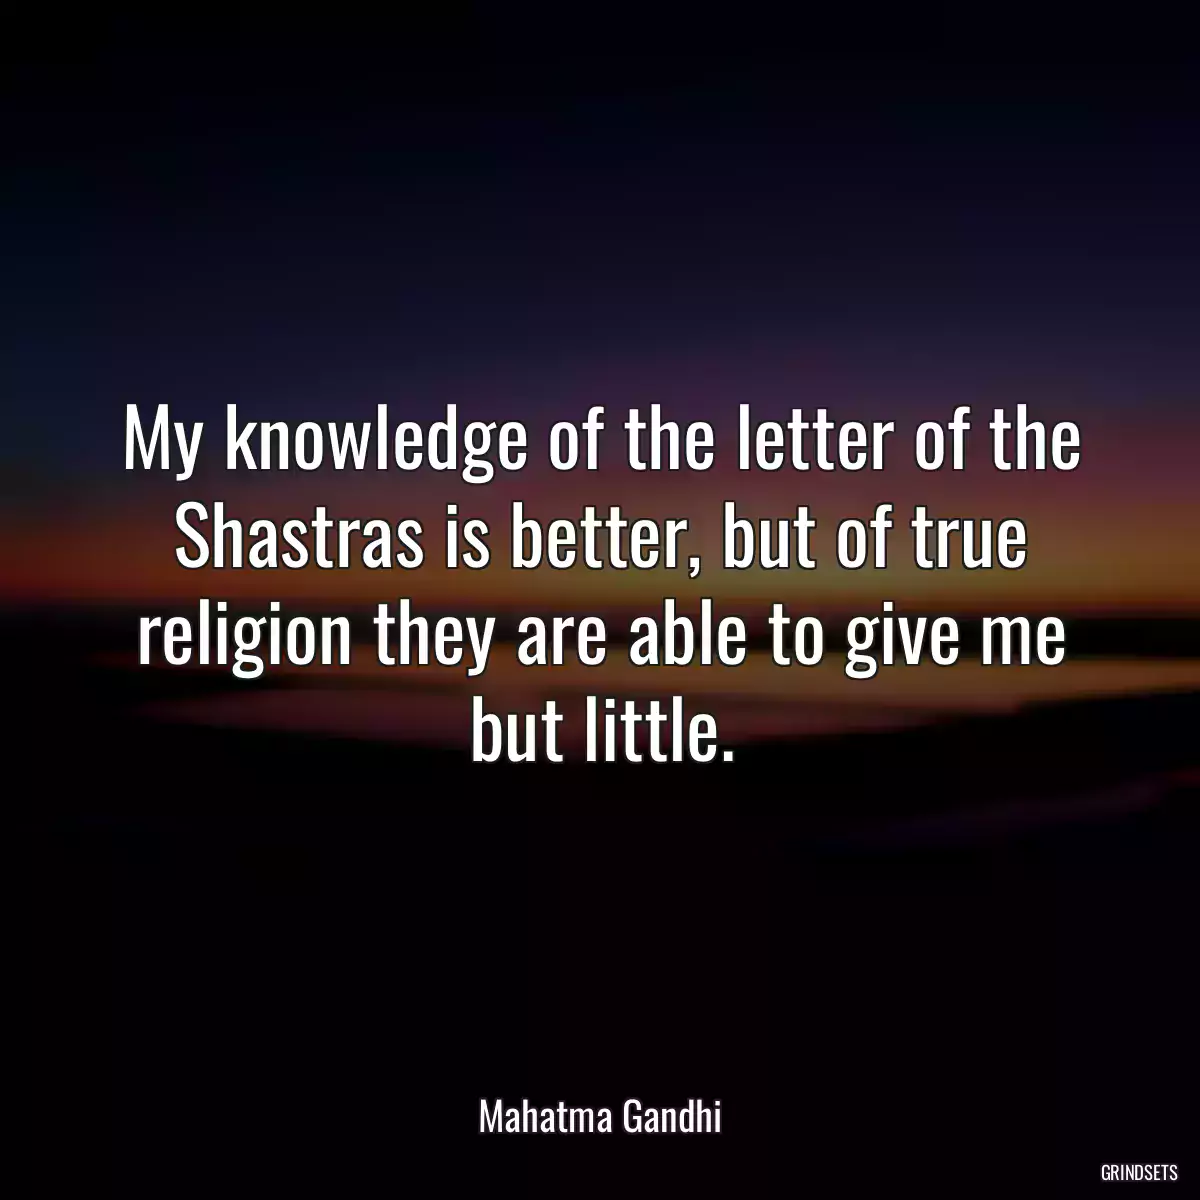 My knowledge of the letter of the Shastras is better, but of true religion they are able to give me but little.